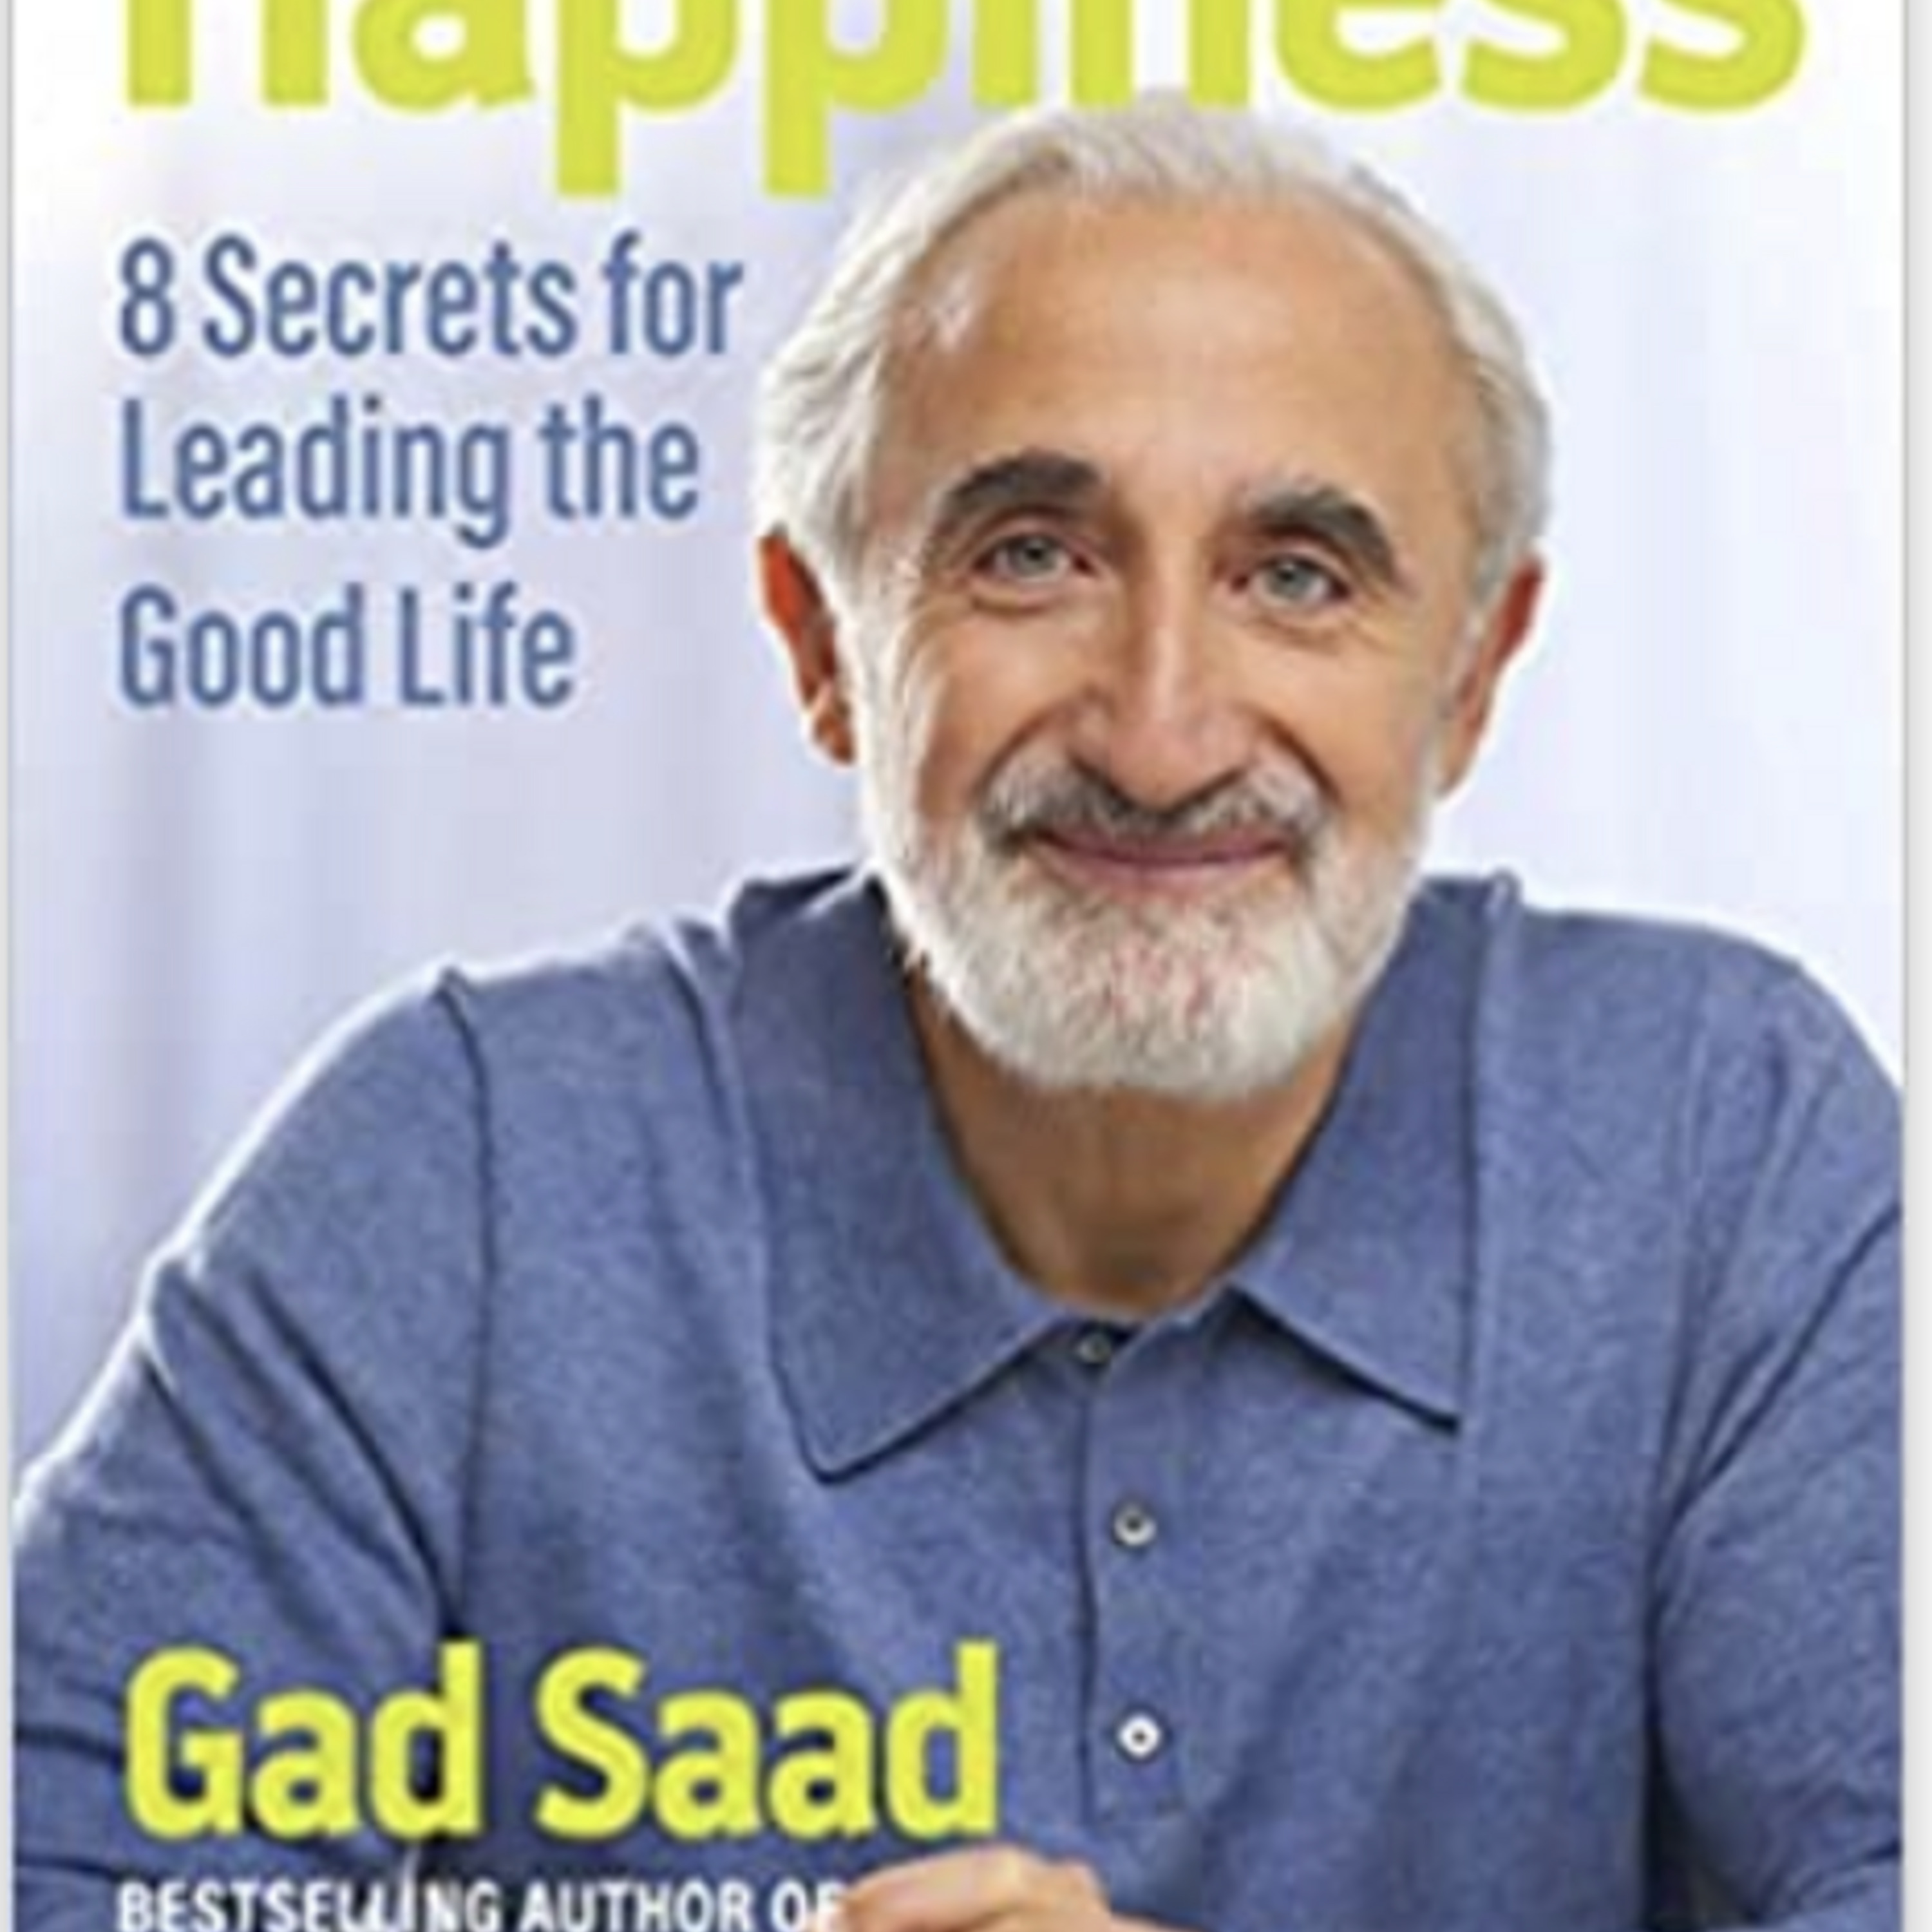 Episode 829: Dr. Gad Saad's fantastic new book is out: 